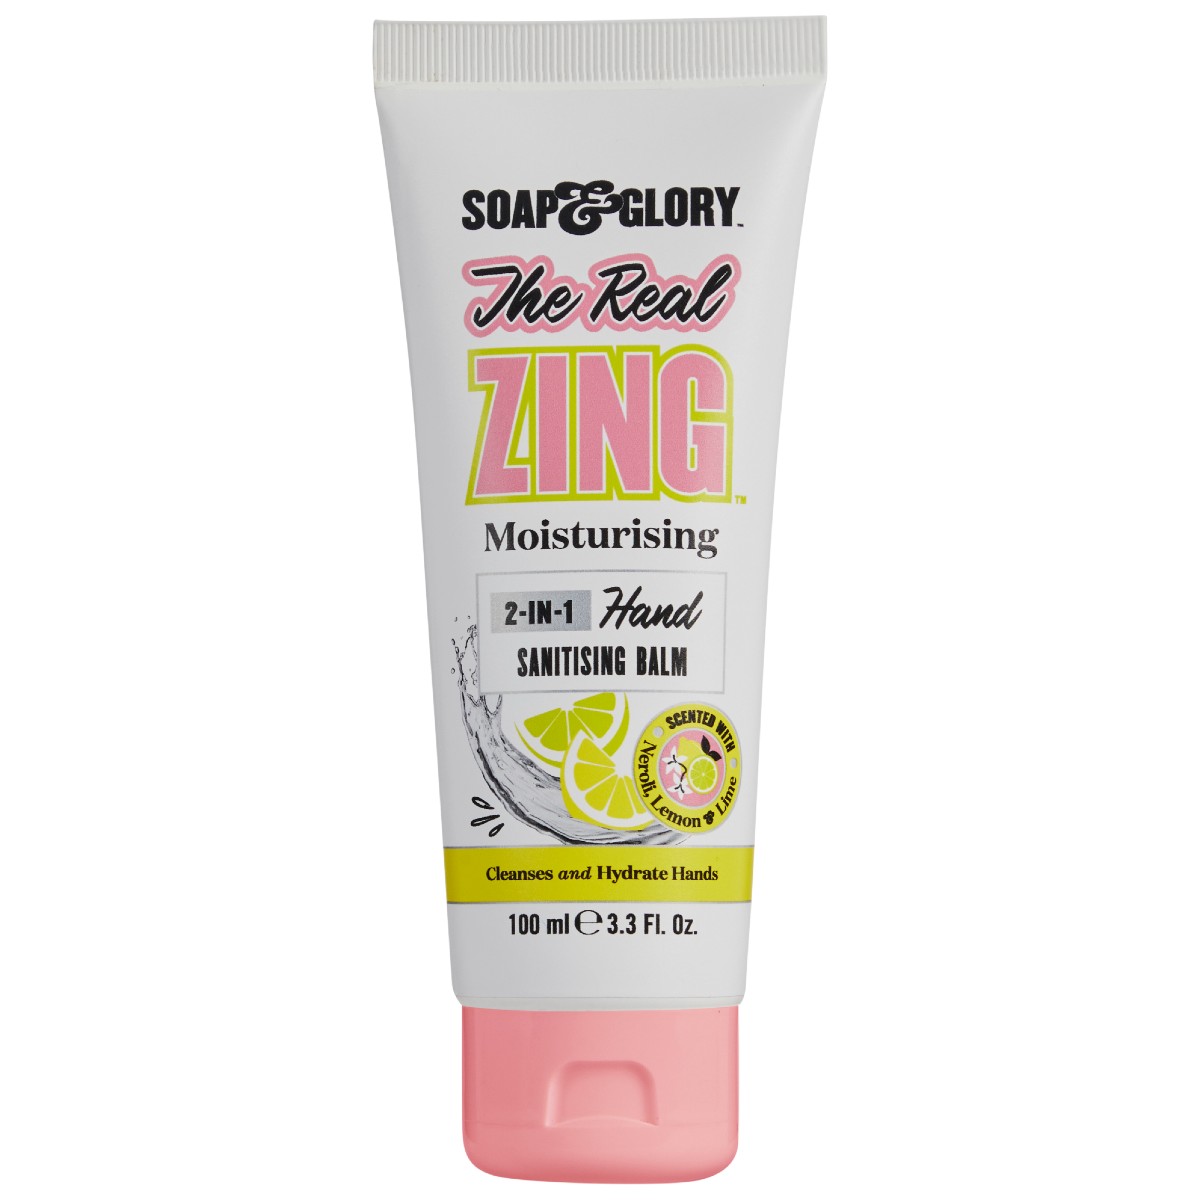 The Real Zing Hand Sanitising Balm